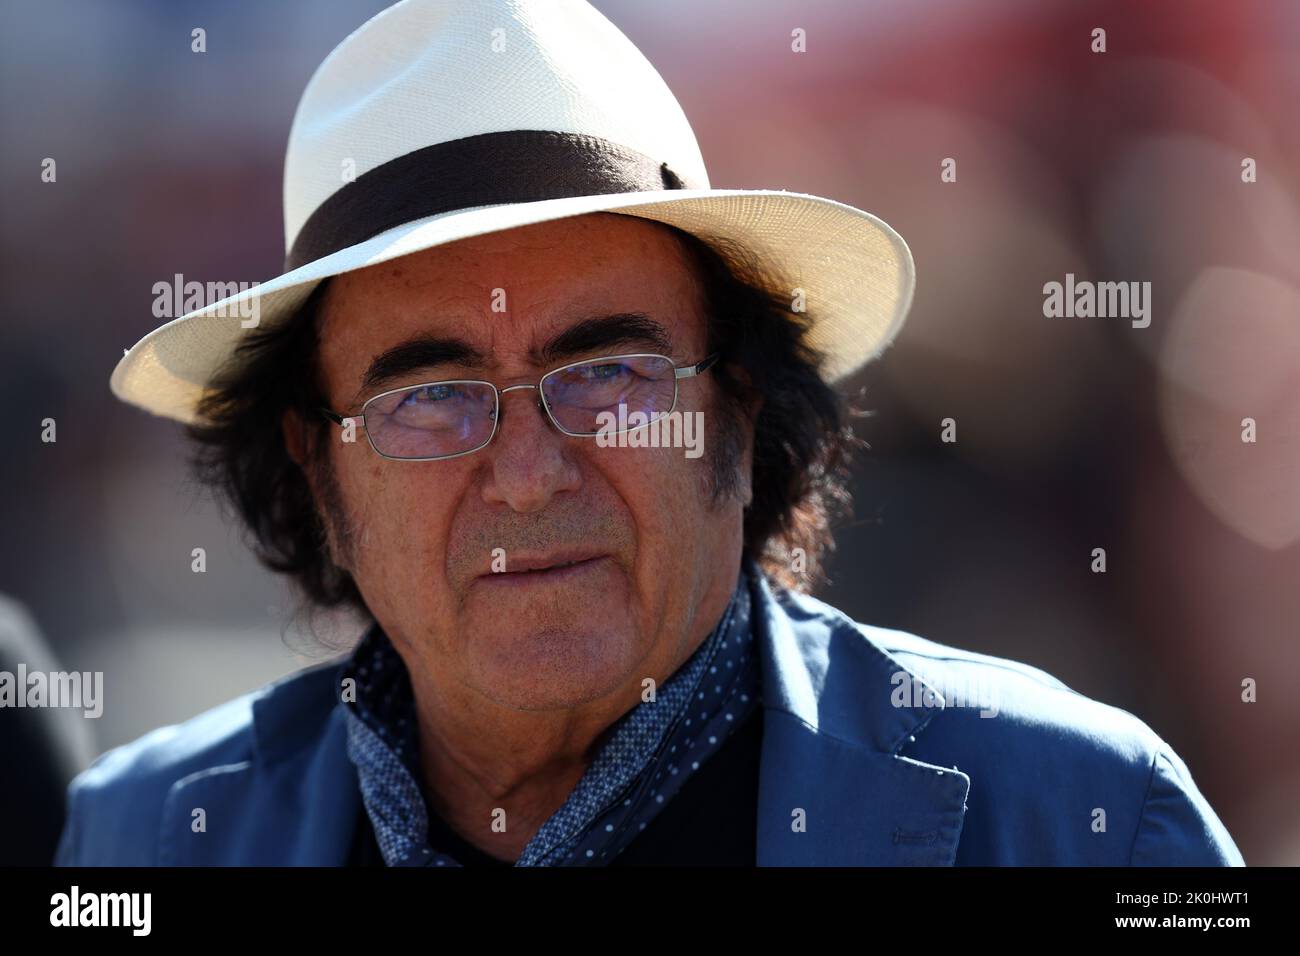 Albano Carrisi in the paddock before the F1 Grand Prix of Italy, Stock Photo